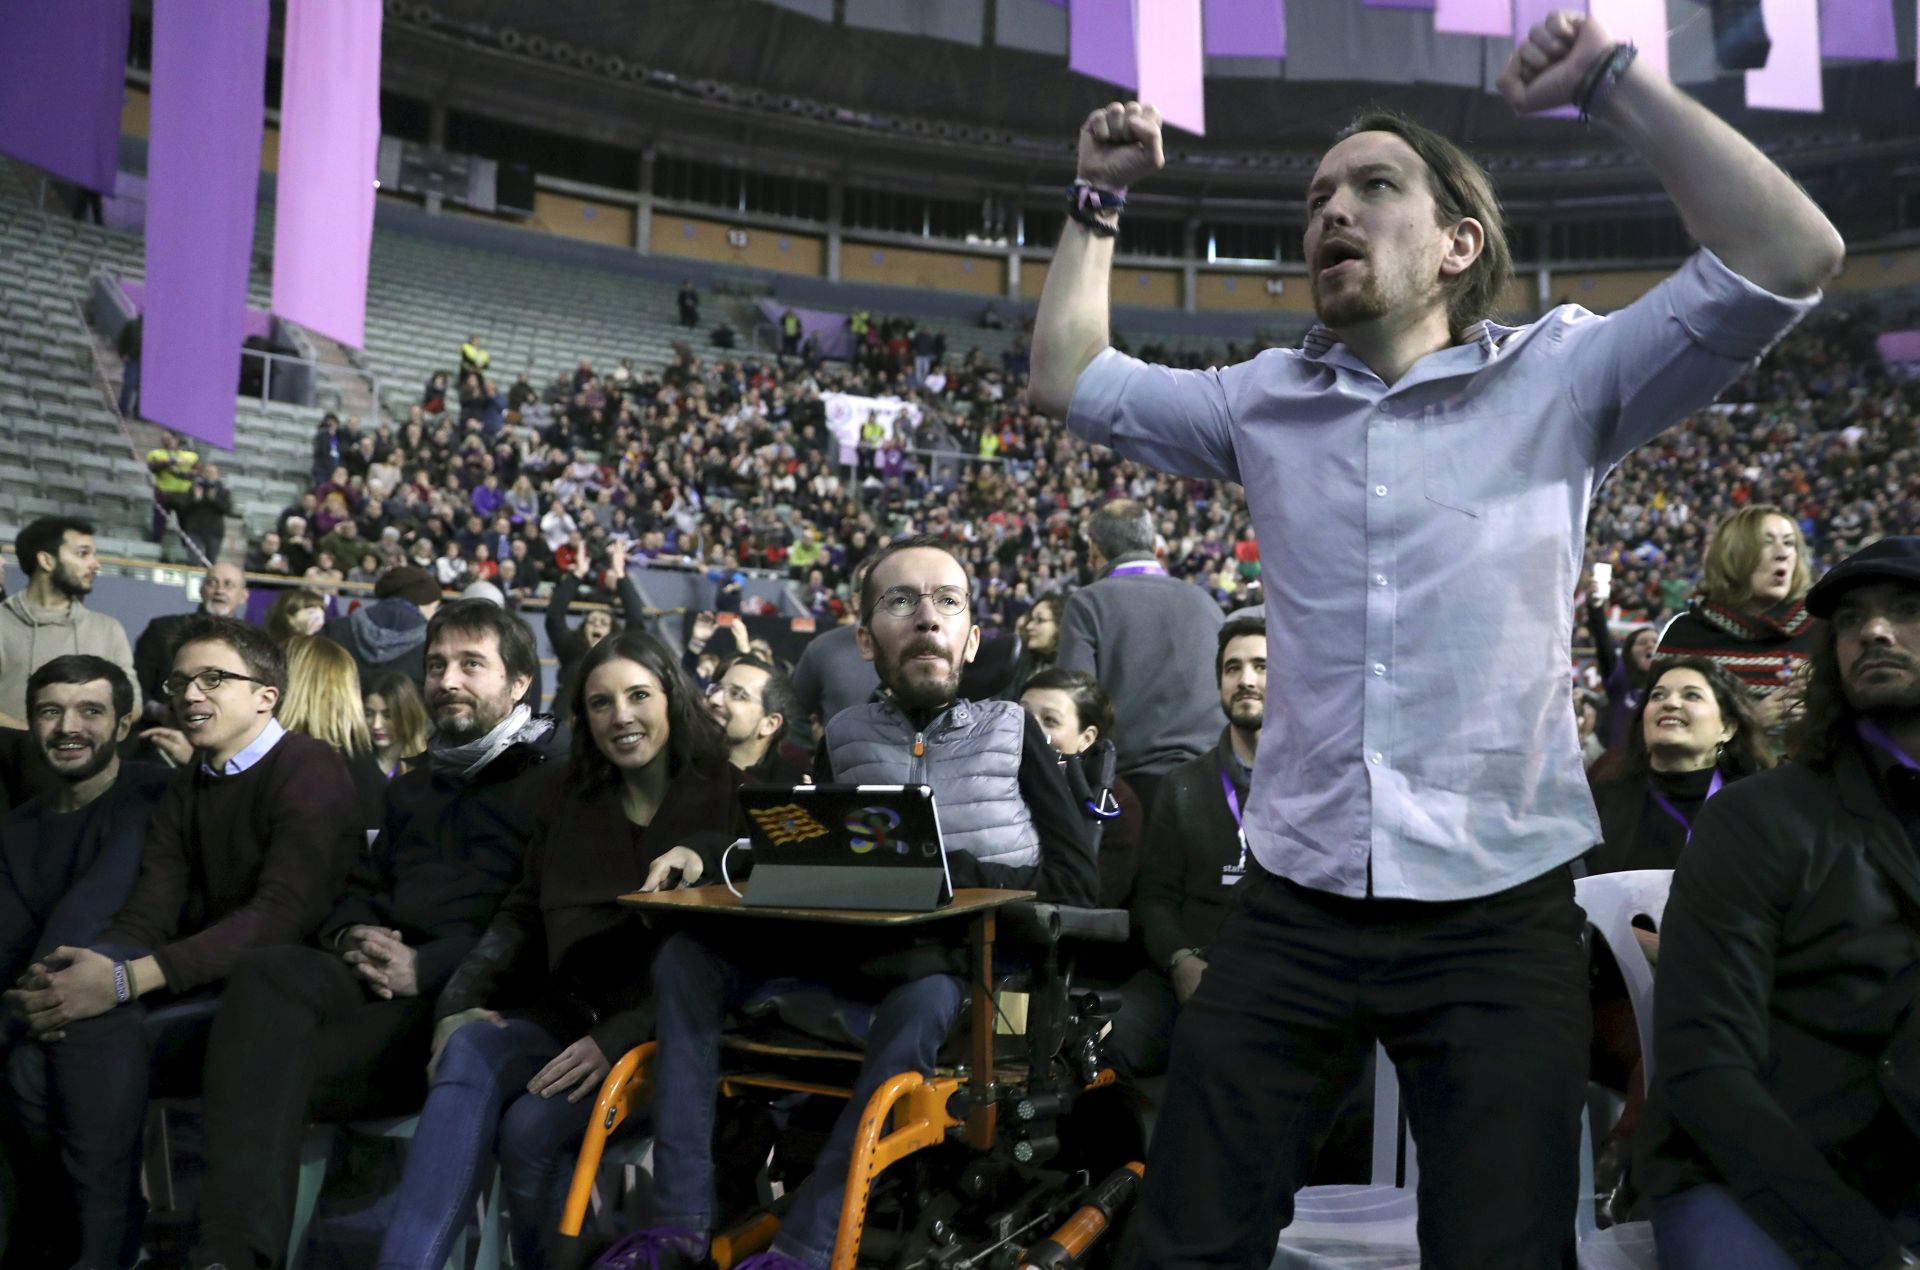 epa05784746 Spanish party 'Podemos' Secretary-General, Pablo Iglesias (R), stands next to secretary of organization, Pablo Echenique (2-R), and party members Pablo Bustinduy (L), Inigo Errejon (2-L), Rafael Mayoral (3-L), and Irene Montero (3-R), during the 2nd Podemos Citizen Assembly, Vistalegre II, in Madrid, Spain, 11 February 2017. The assembly, which will be held on 11 and 12 February, will define the future of the party.  EPA/CHEMA MOYA